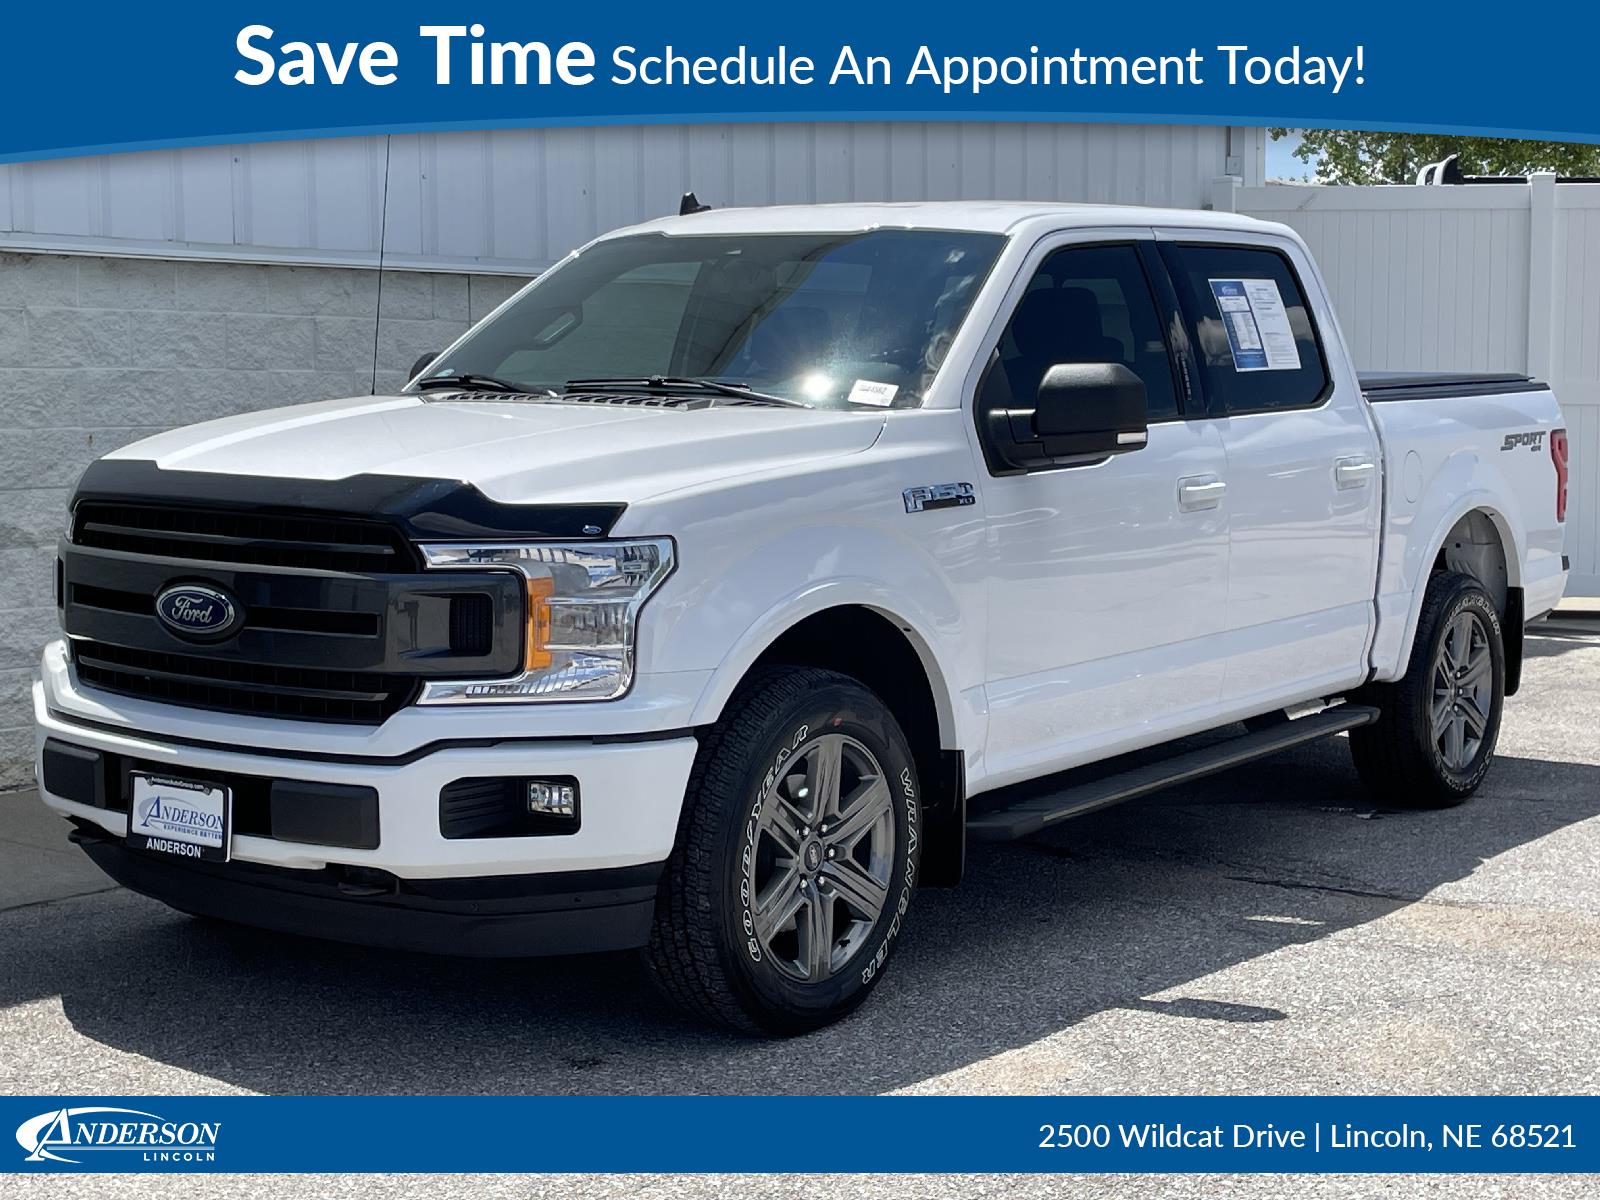 Used 2020 Ford F-150 XLT Stock: 1004456Z